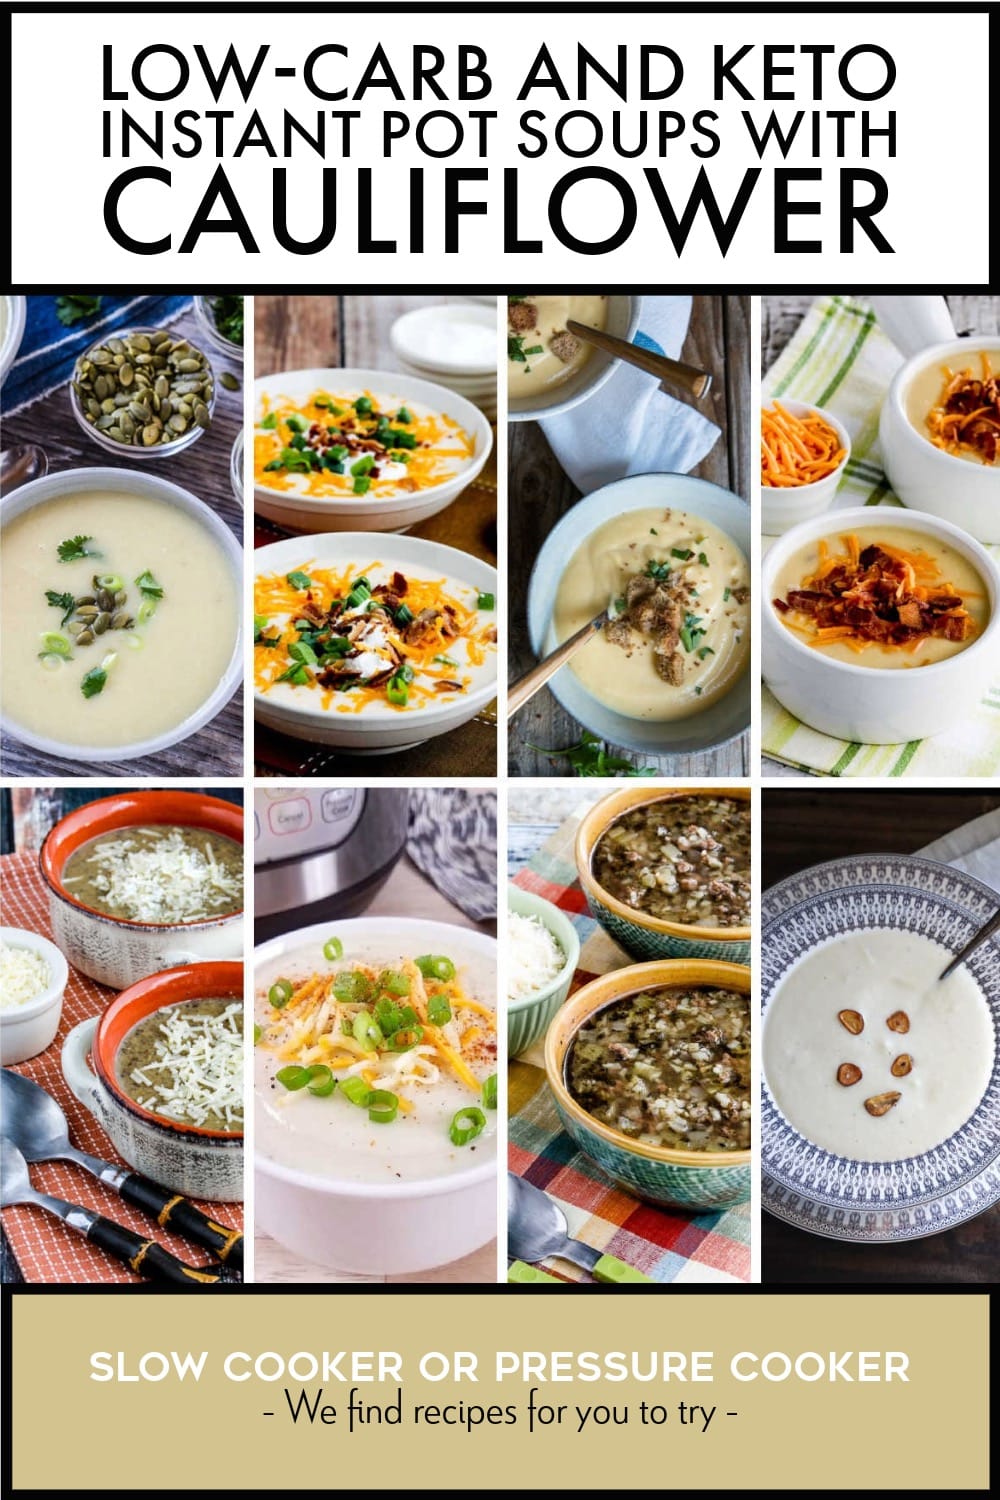 Pinterest image of Low-Carb and Keto Instant Pot Soups with Cauliflower